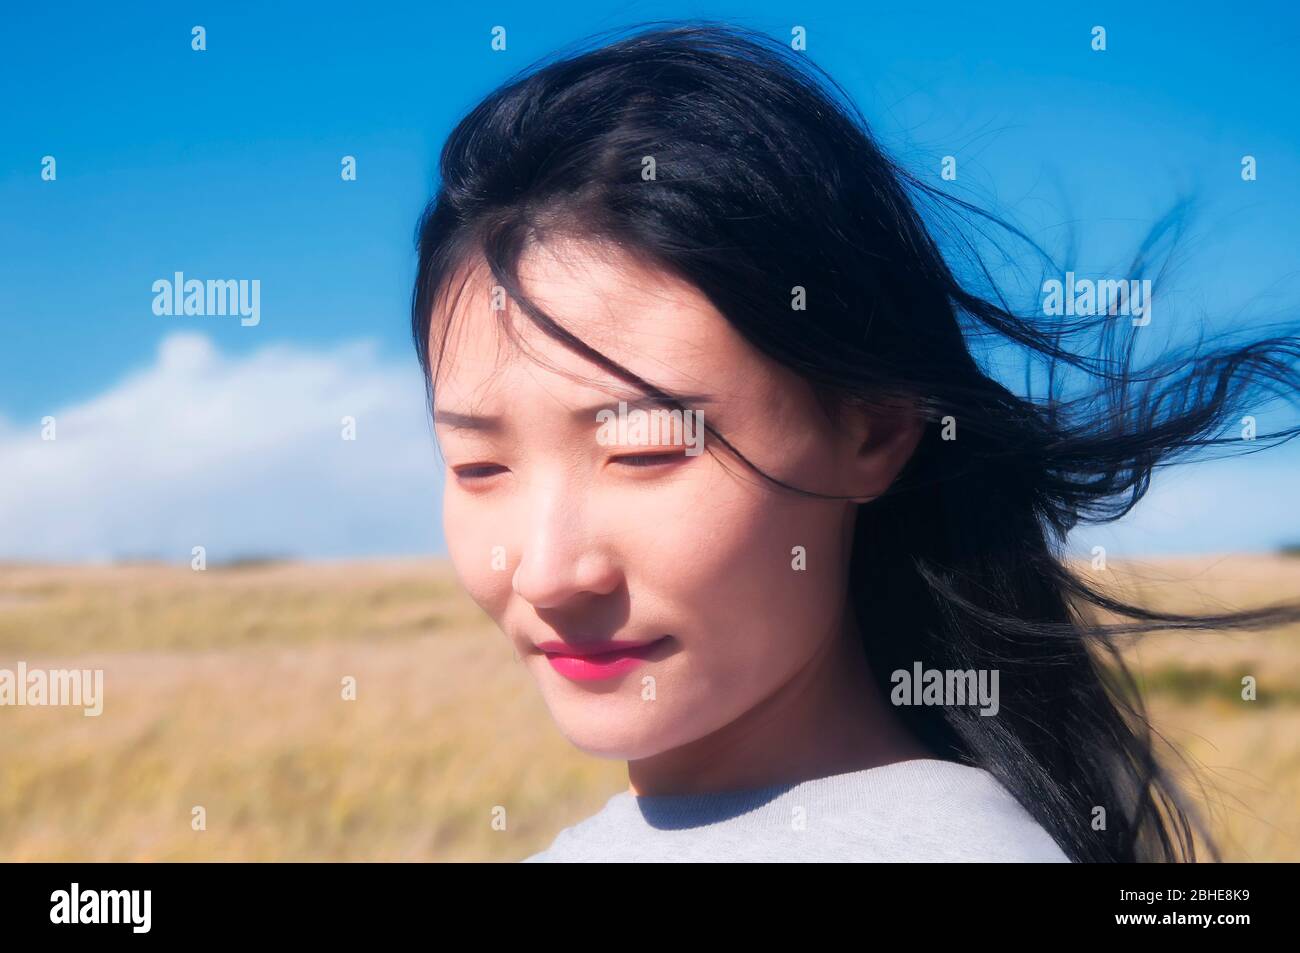 A chinese woman with hair blowing in the wind within the national seashore scenic area in Cape Cod Massachusetts on a sunny blue sky day. Stock Photo